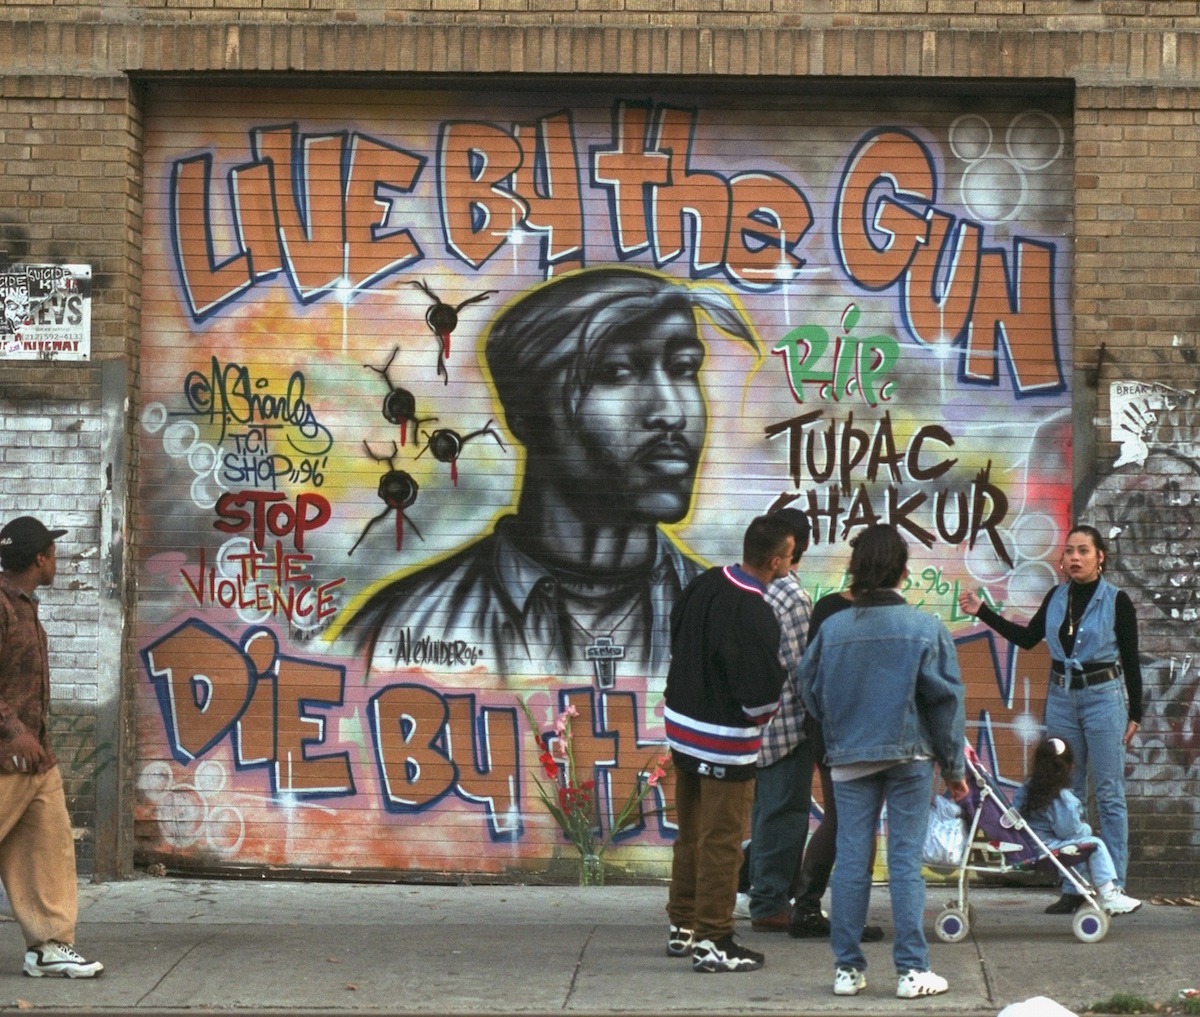 A memorial to the late Tupac Shakur on the Lower East Side of New York City in September of 1996 (New York Daily News Archive / Getty Images)